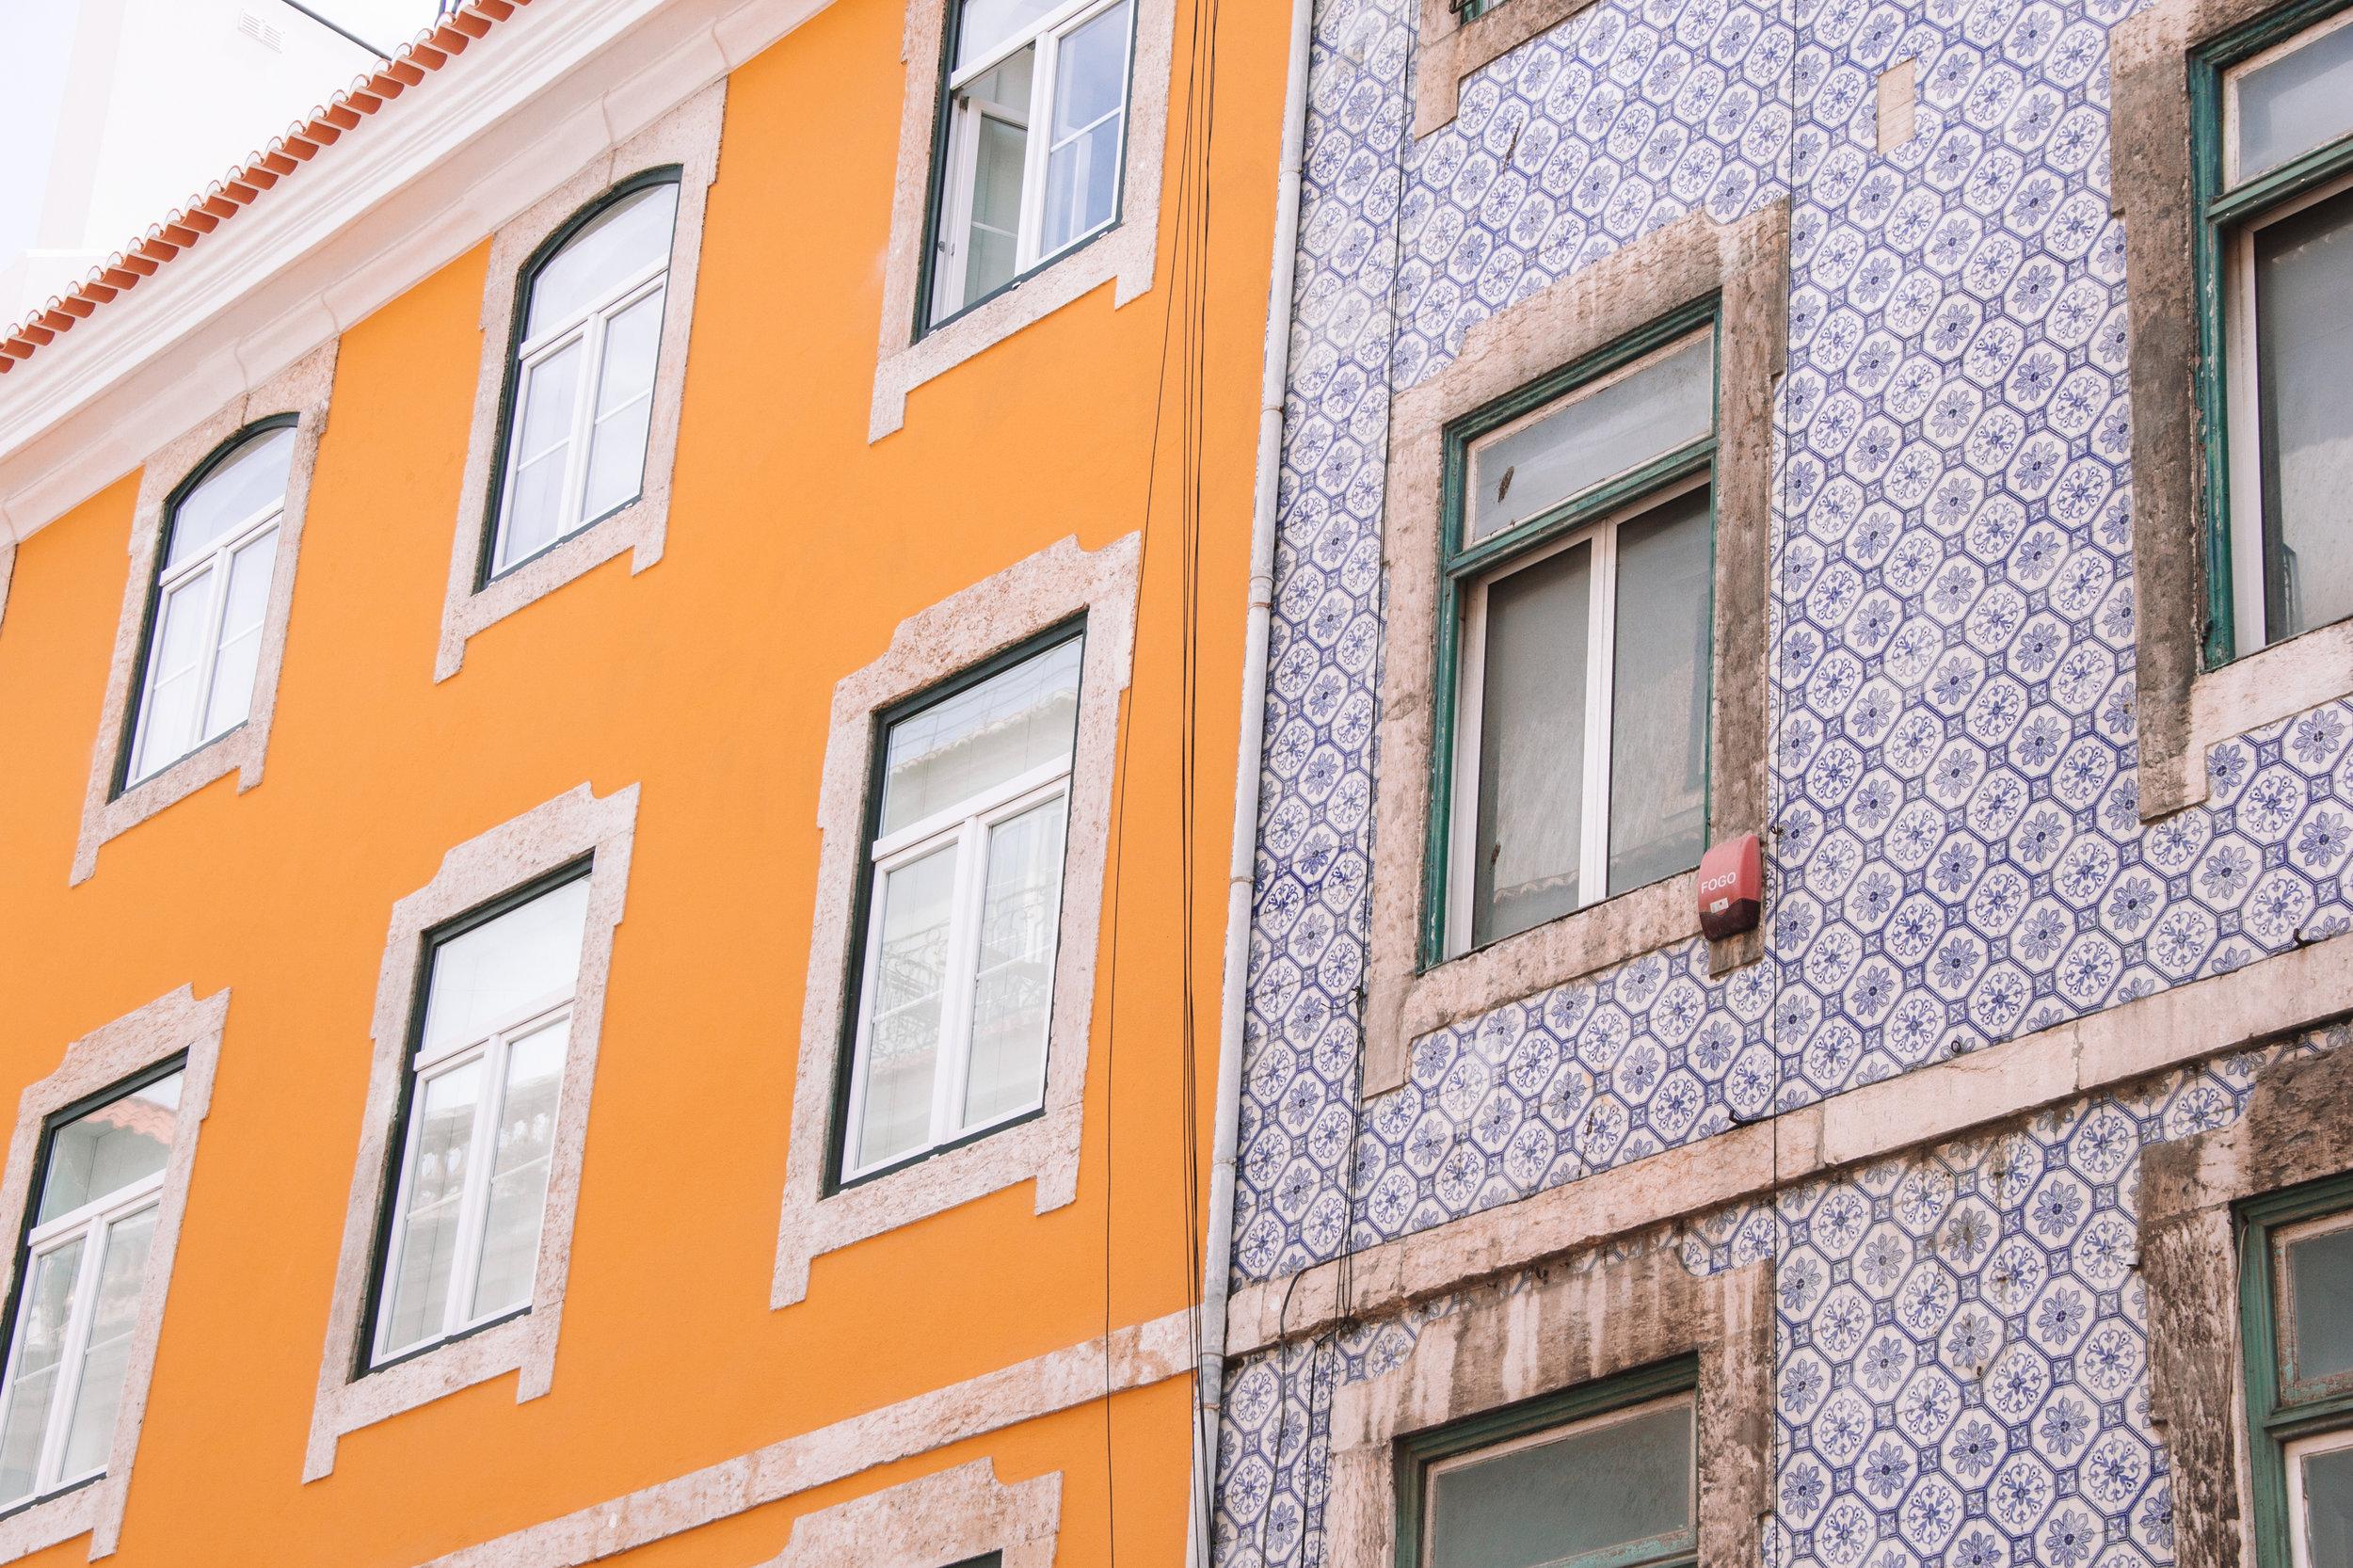 Brightly colored buildings in Portugal